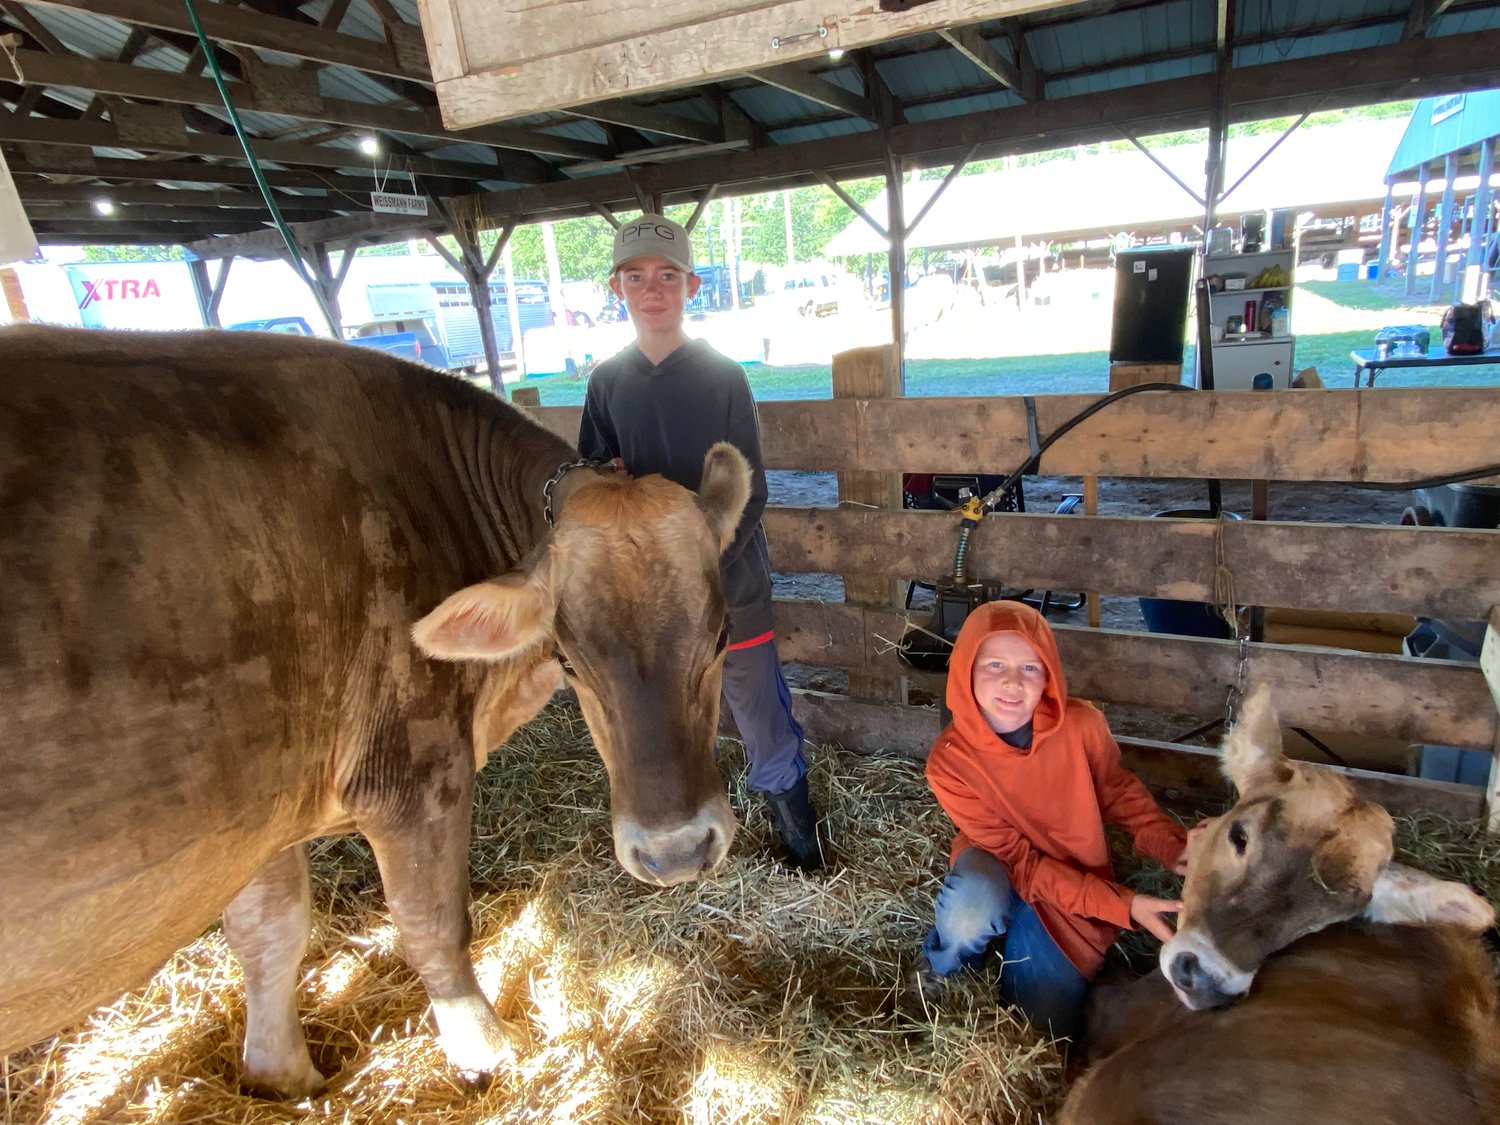 Cody Taggart, 13 and Ethan Taggart, 11, of Bluebird Farm in Unadilla with their Brown Swiss cows at the Delaware County Fair on Sunday, Aug. 14.